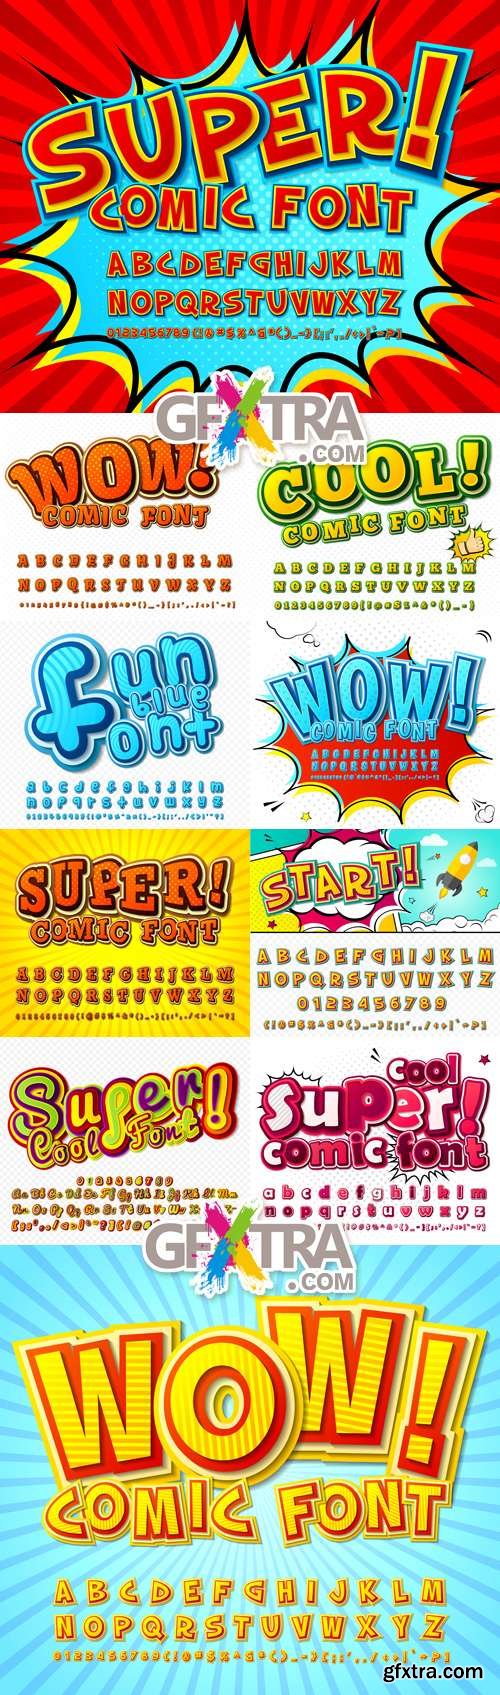 Comic Fonts Collection Vector